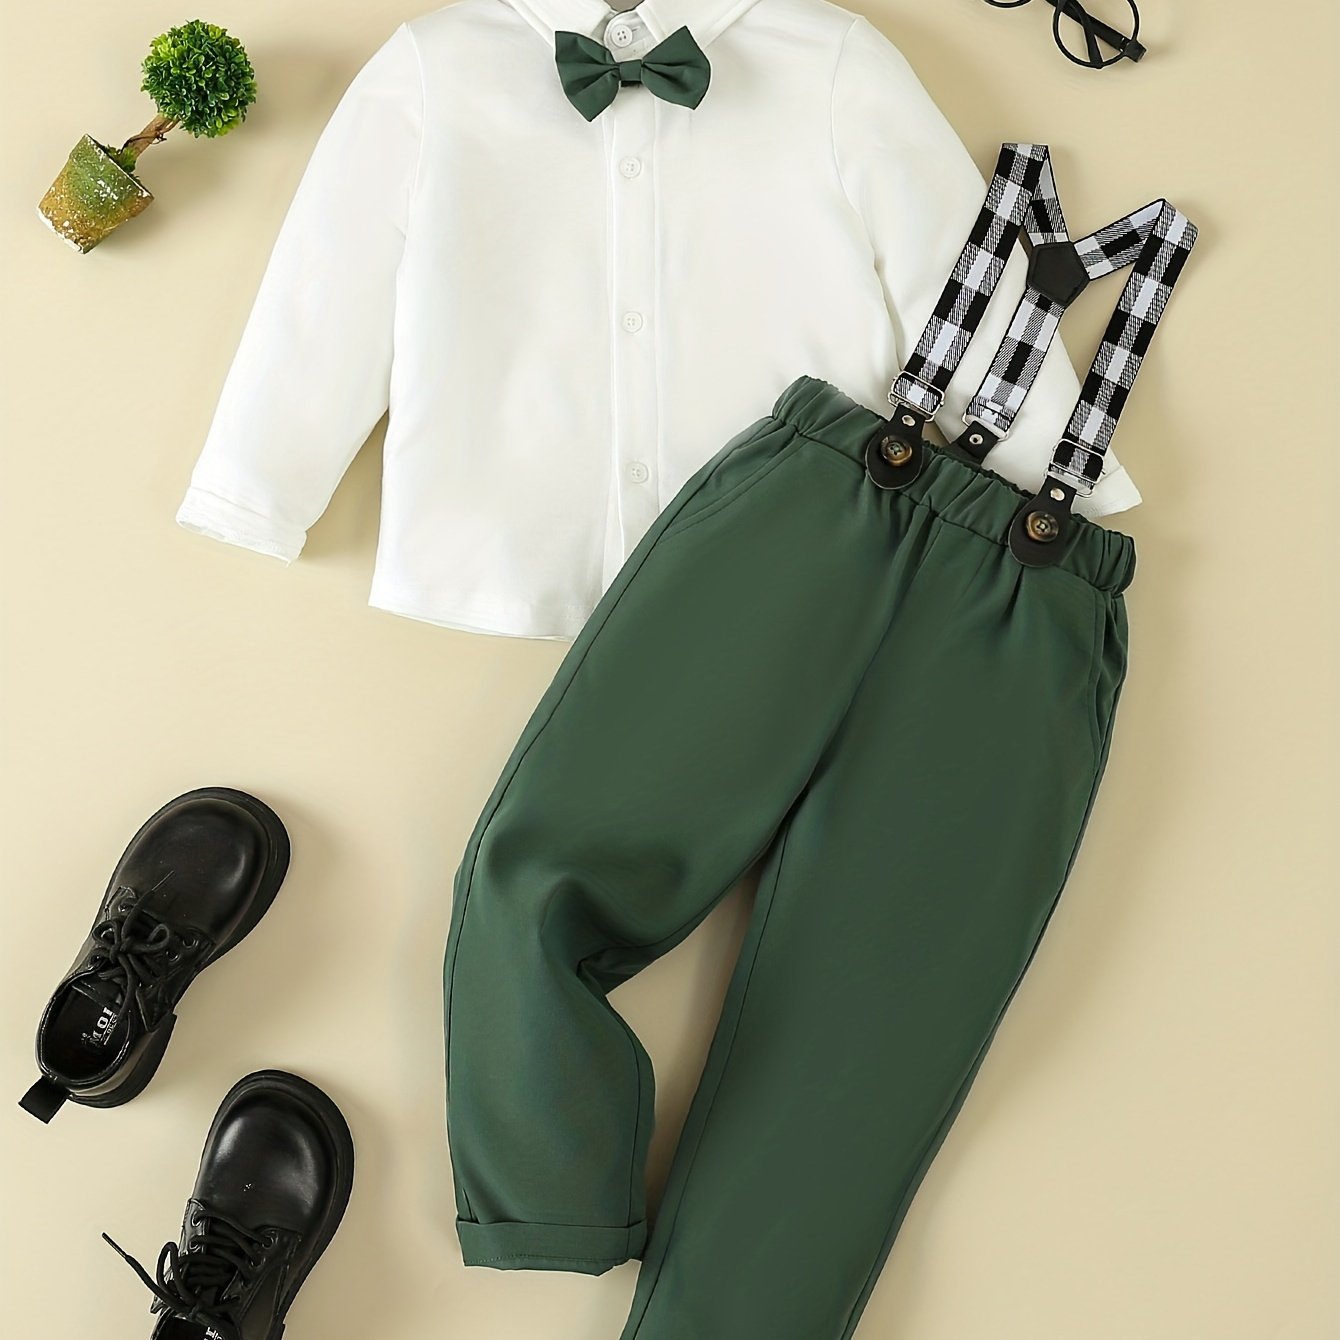 

Boy's Plaid Pattern Suspenders Gentleman Outfit, Bowtie Shirt & Overalls Set, Formal Wear For Speech Performance Birthday Party, Kid's Clothes